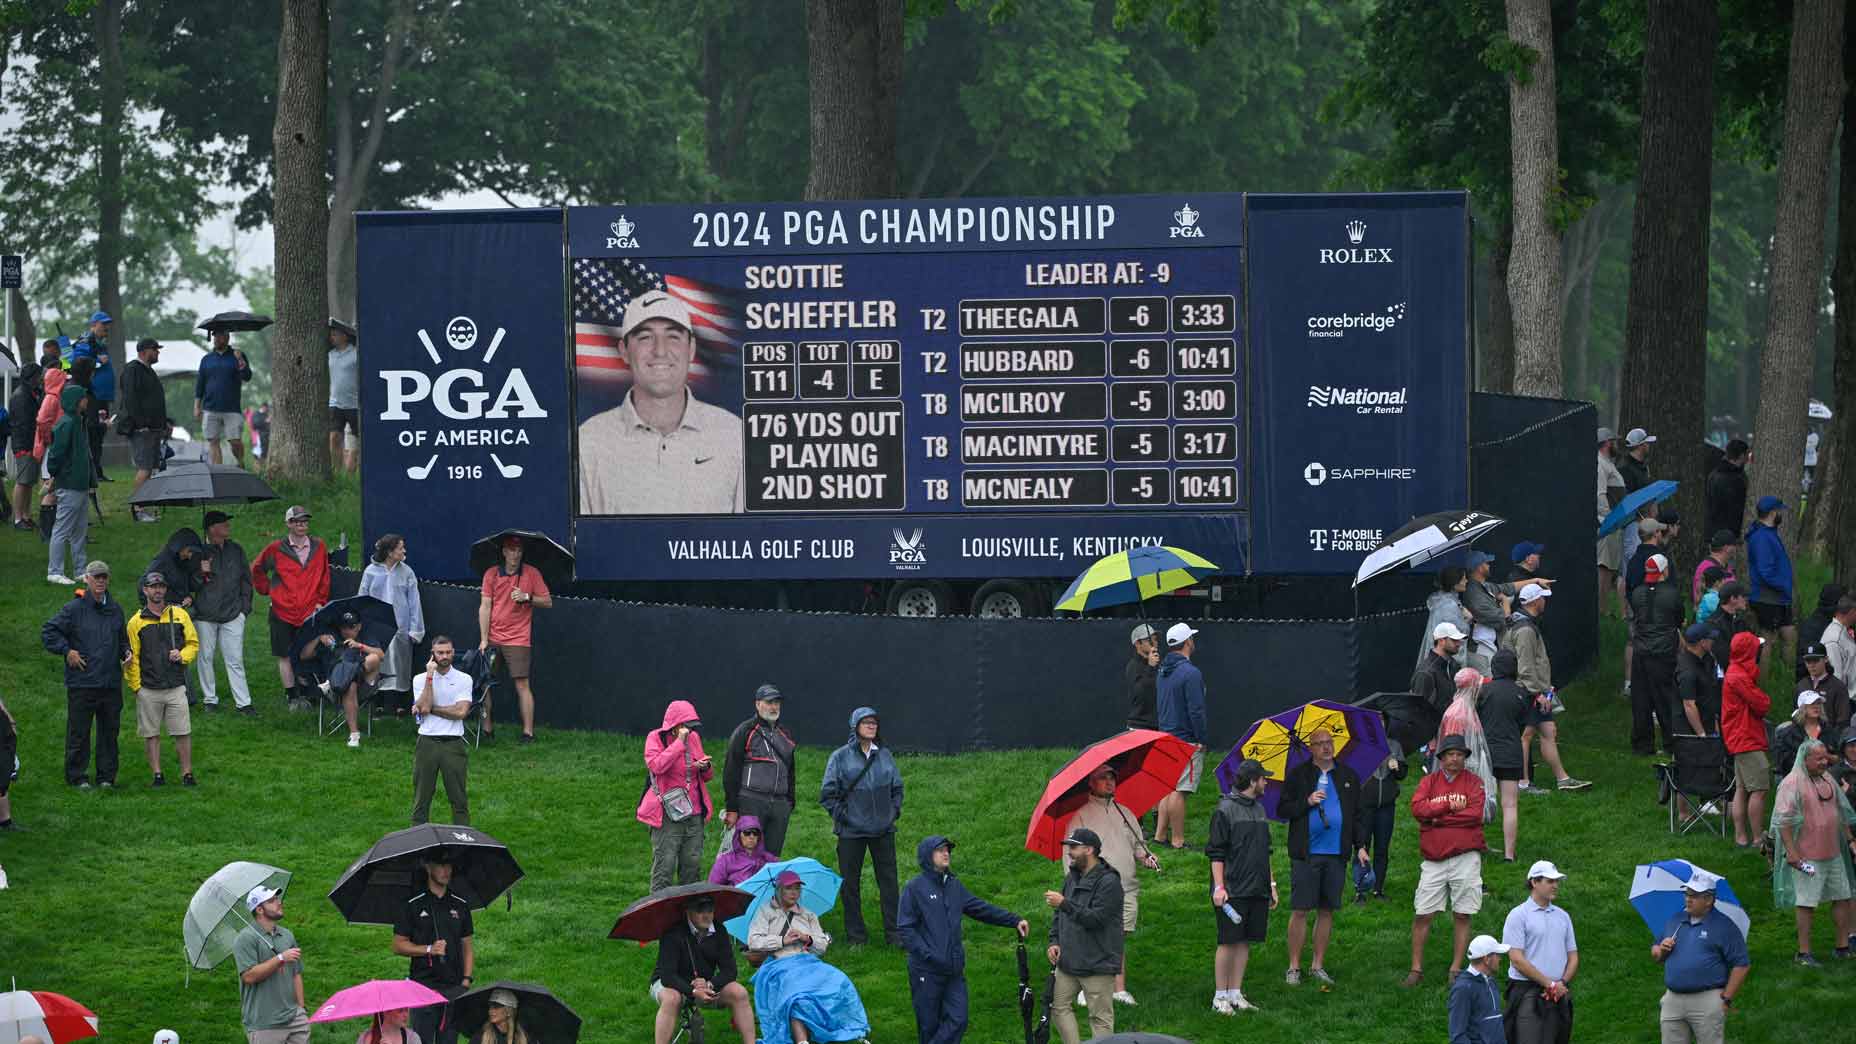 A video board at Valhalla pictured during 2024 PGA Championship